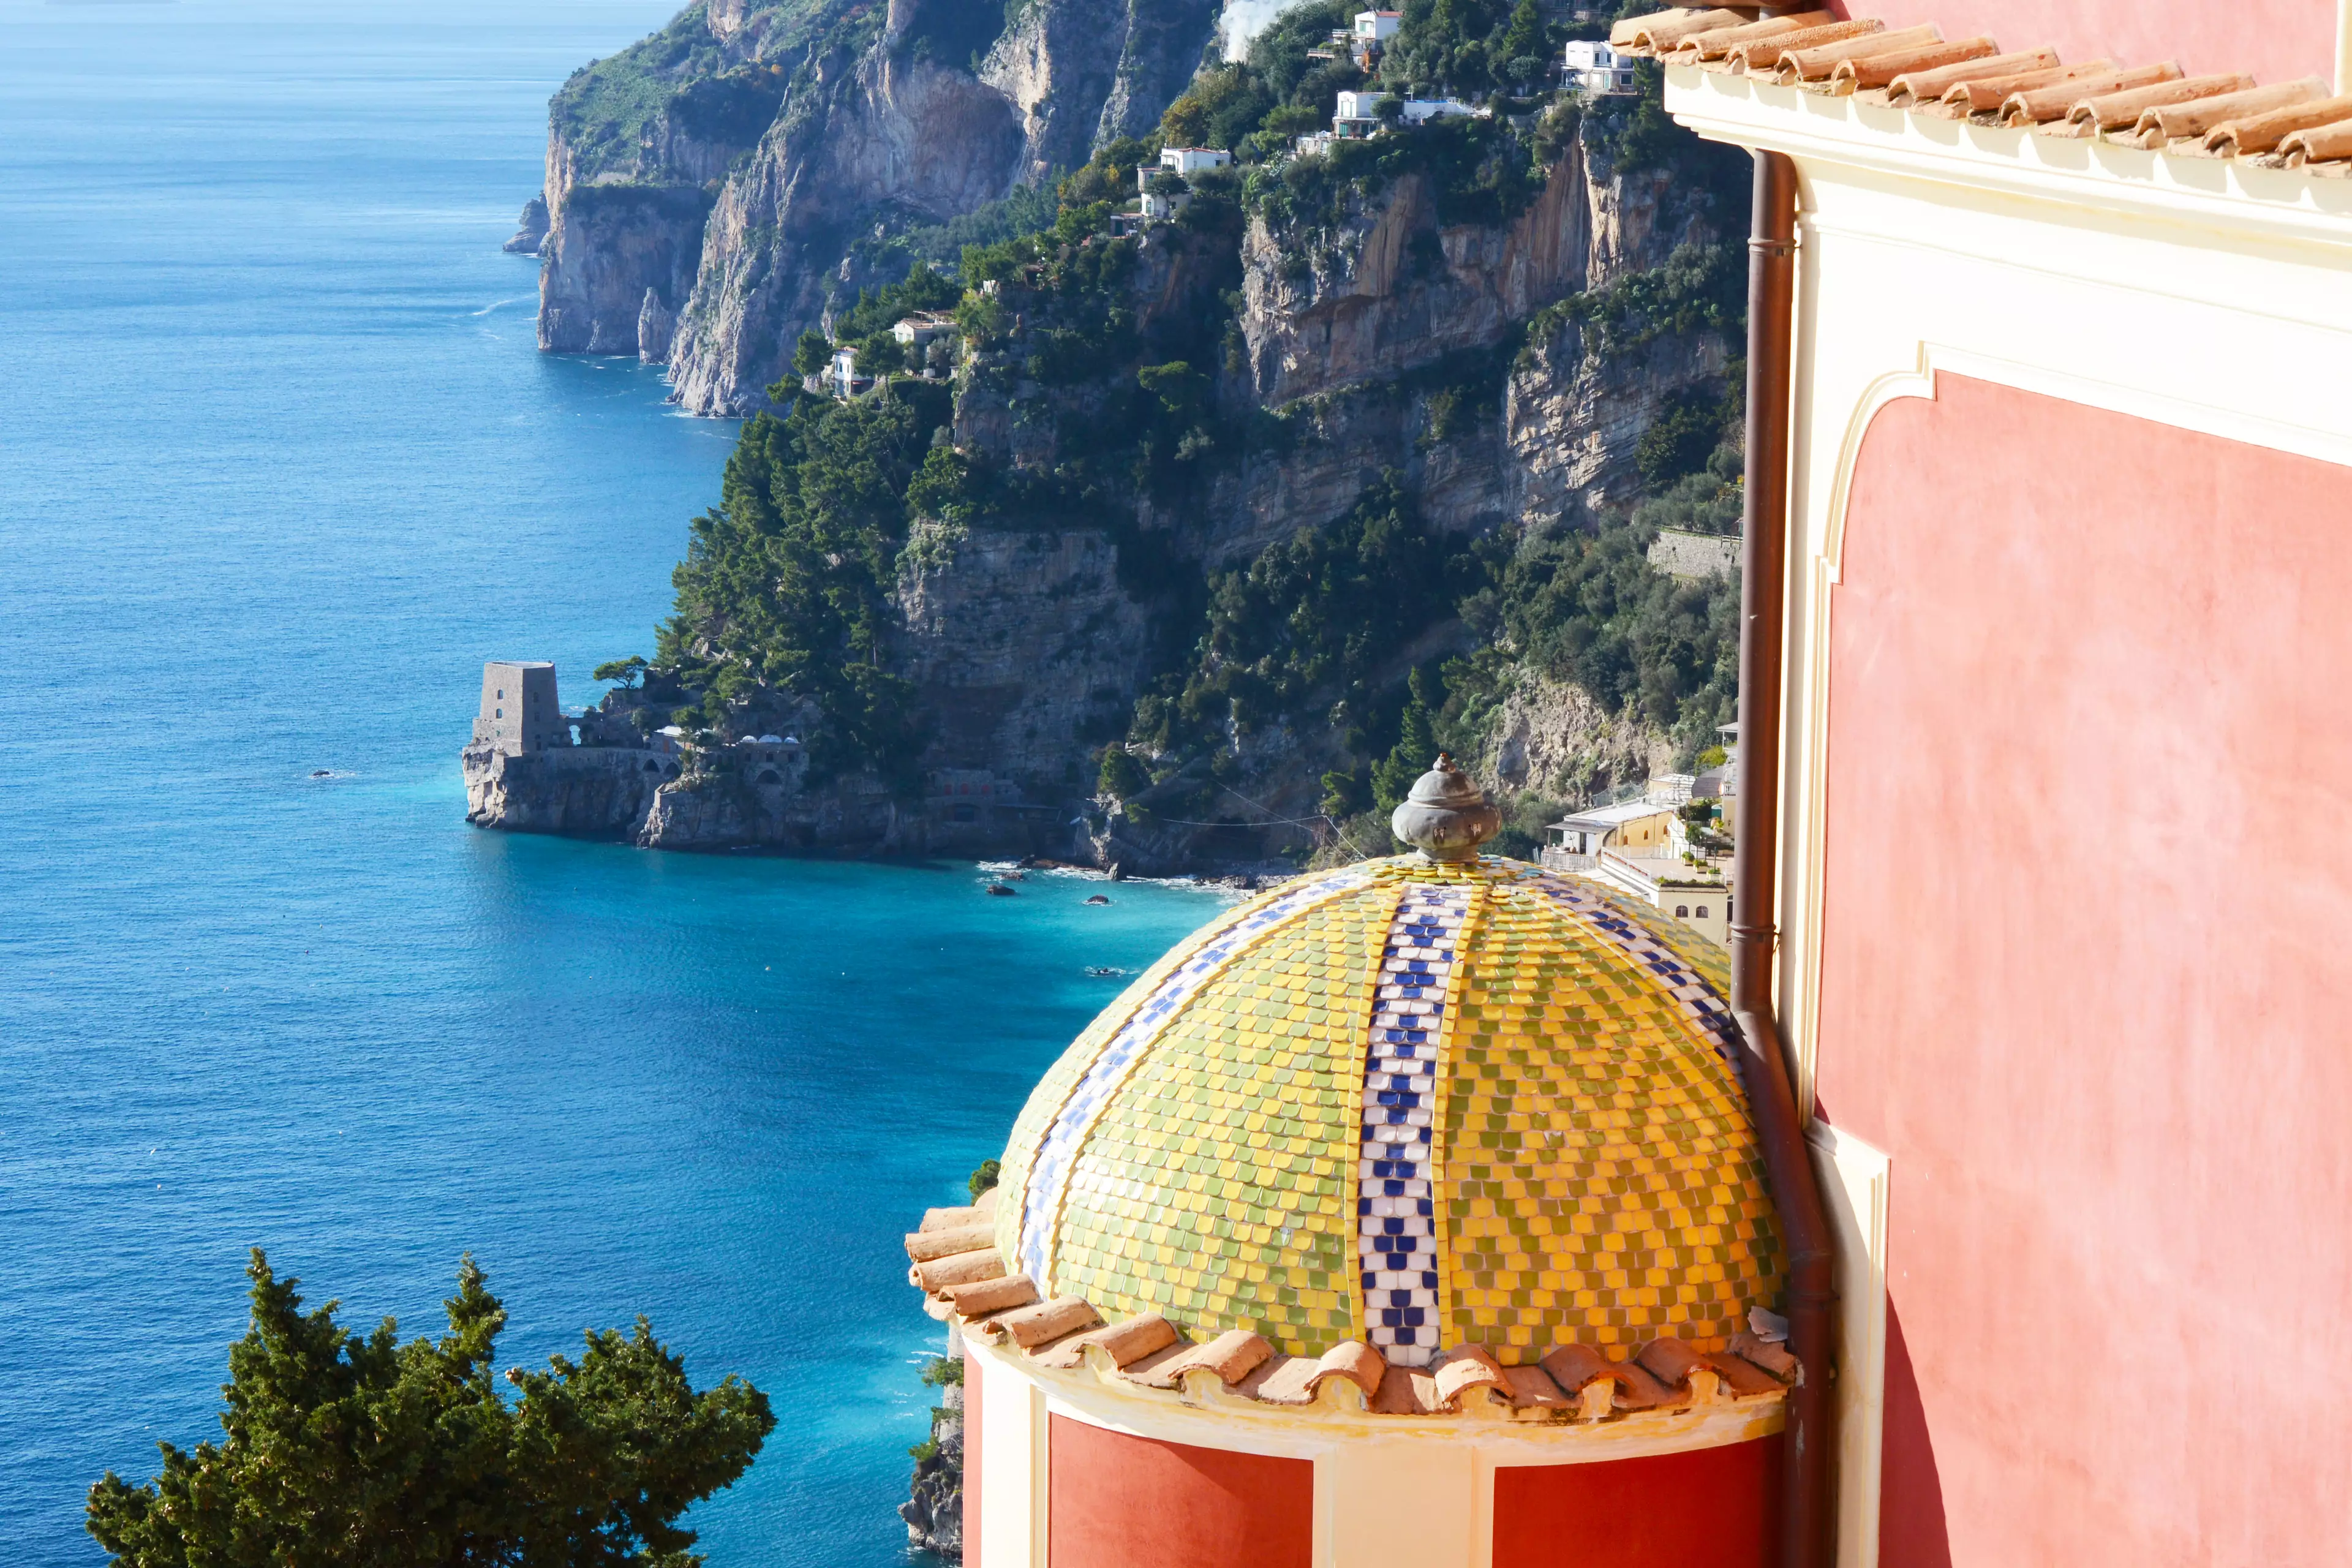 The view from the terraces are beautiful - overlooking Positano bay (